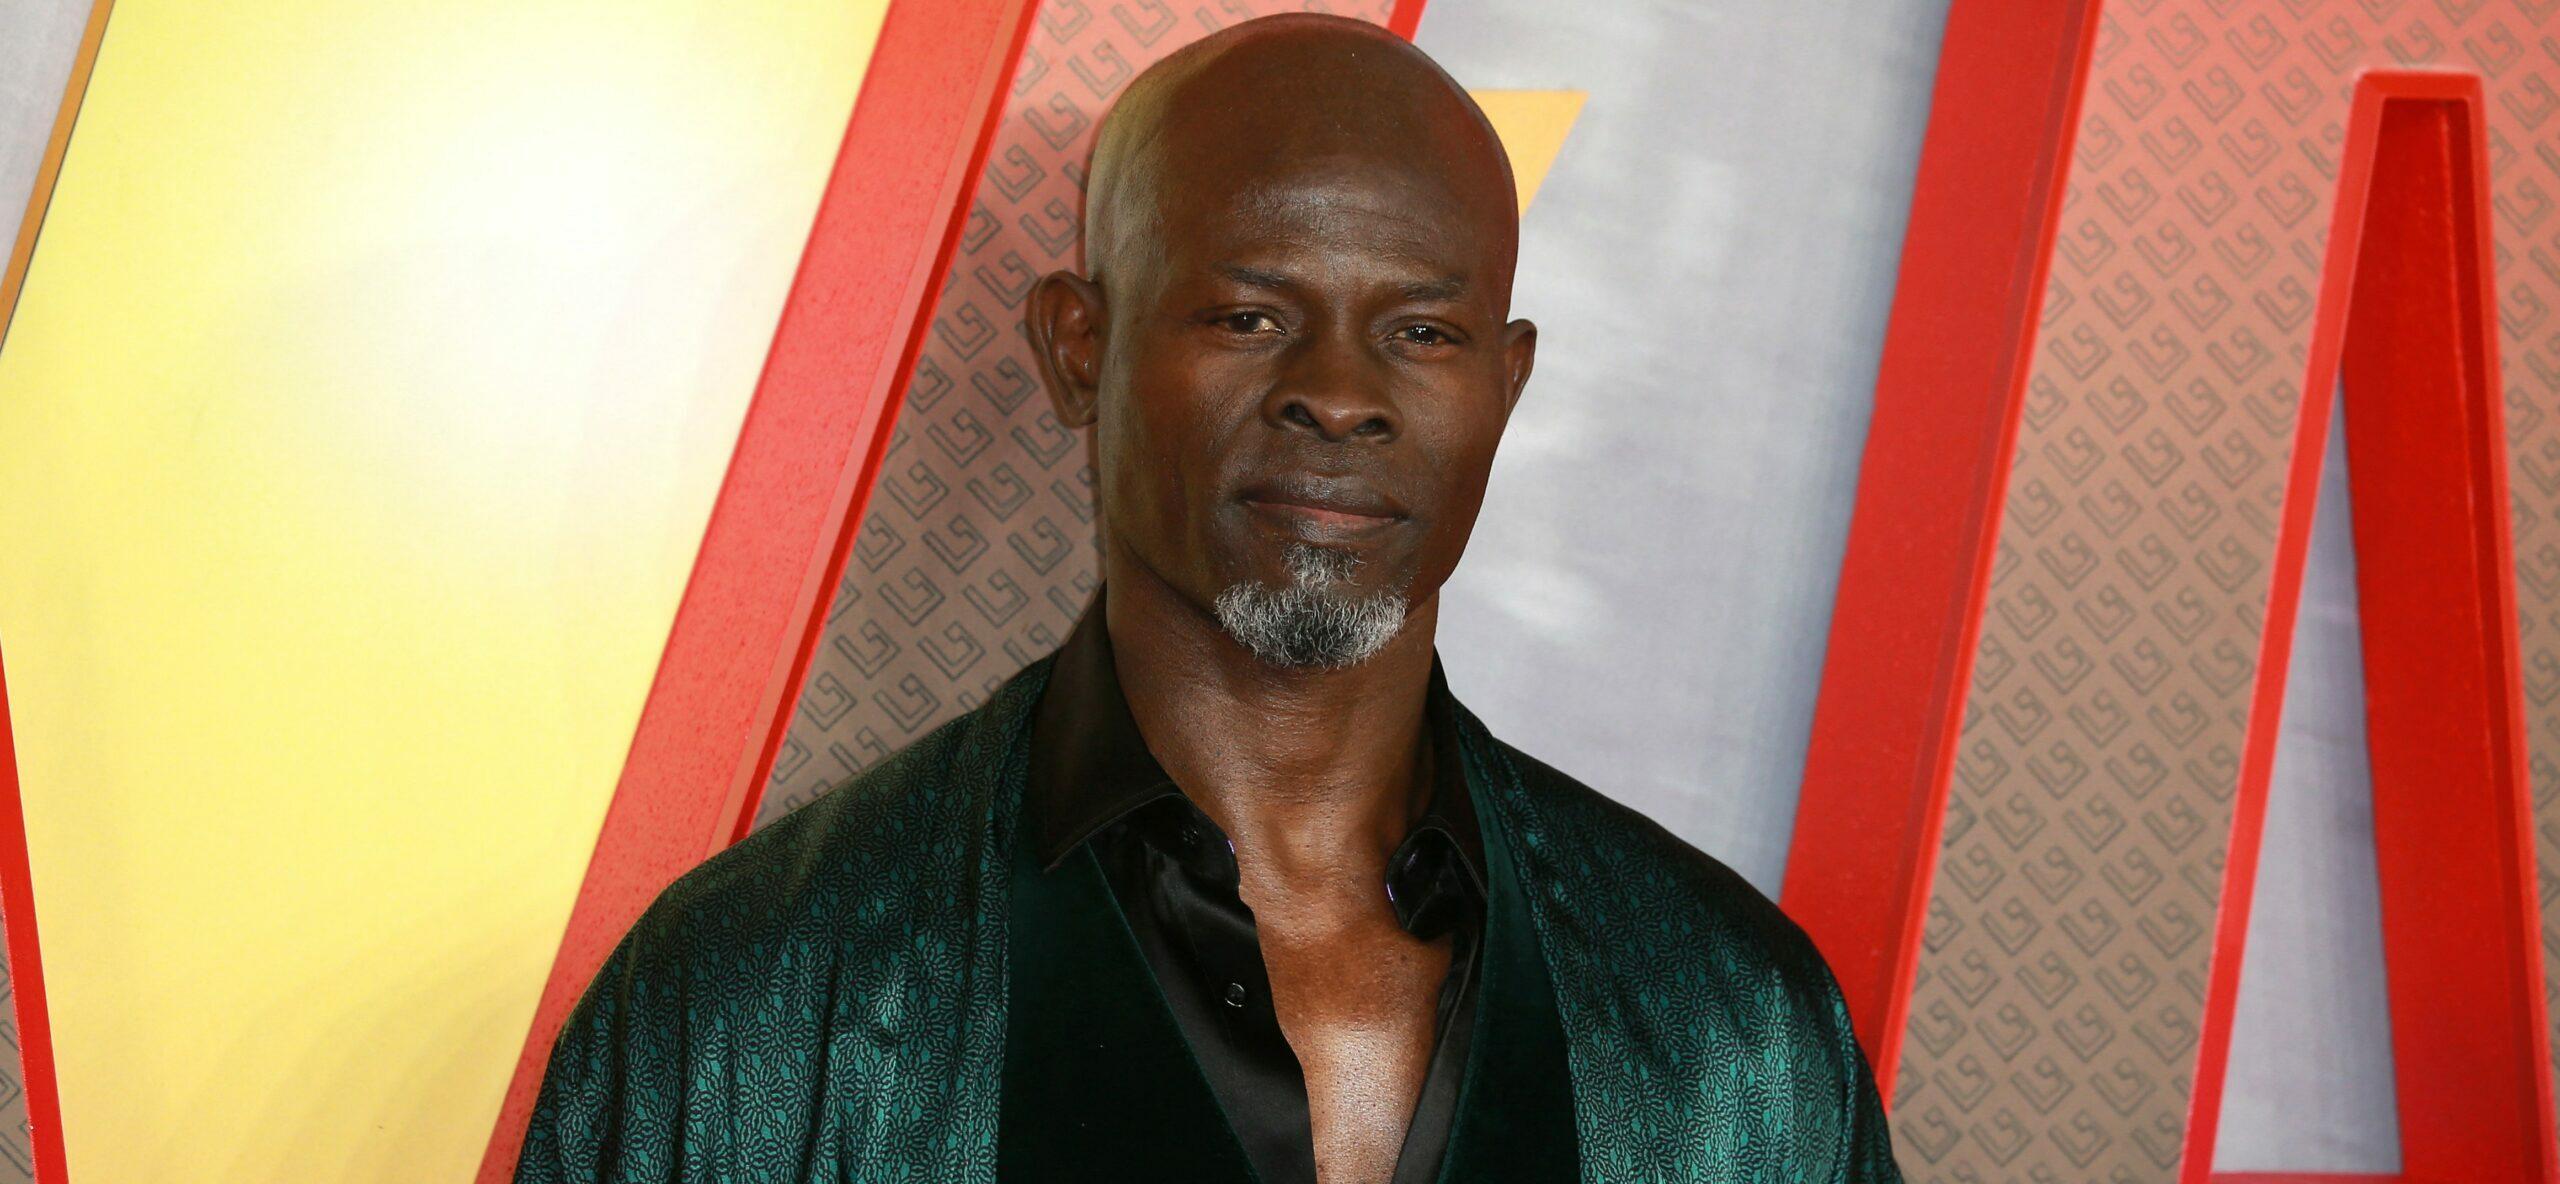 Djimon Hounsou Claims He Was Never Paid Well Enough For Any Film, Feels ‘Cheated’ By Hollywood